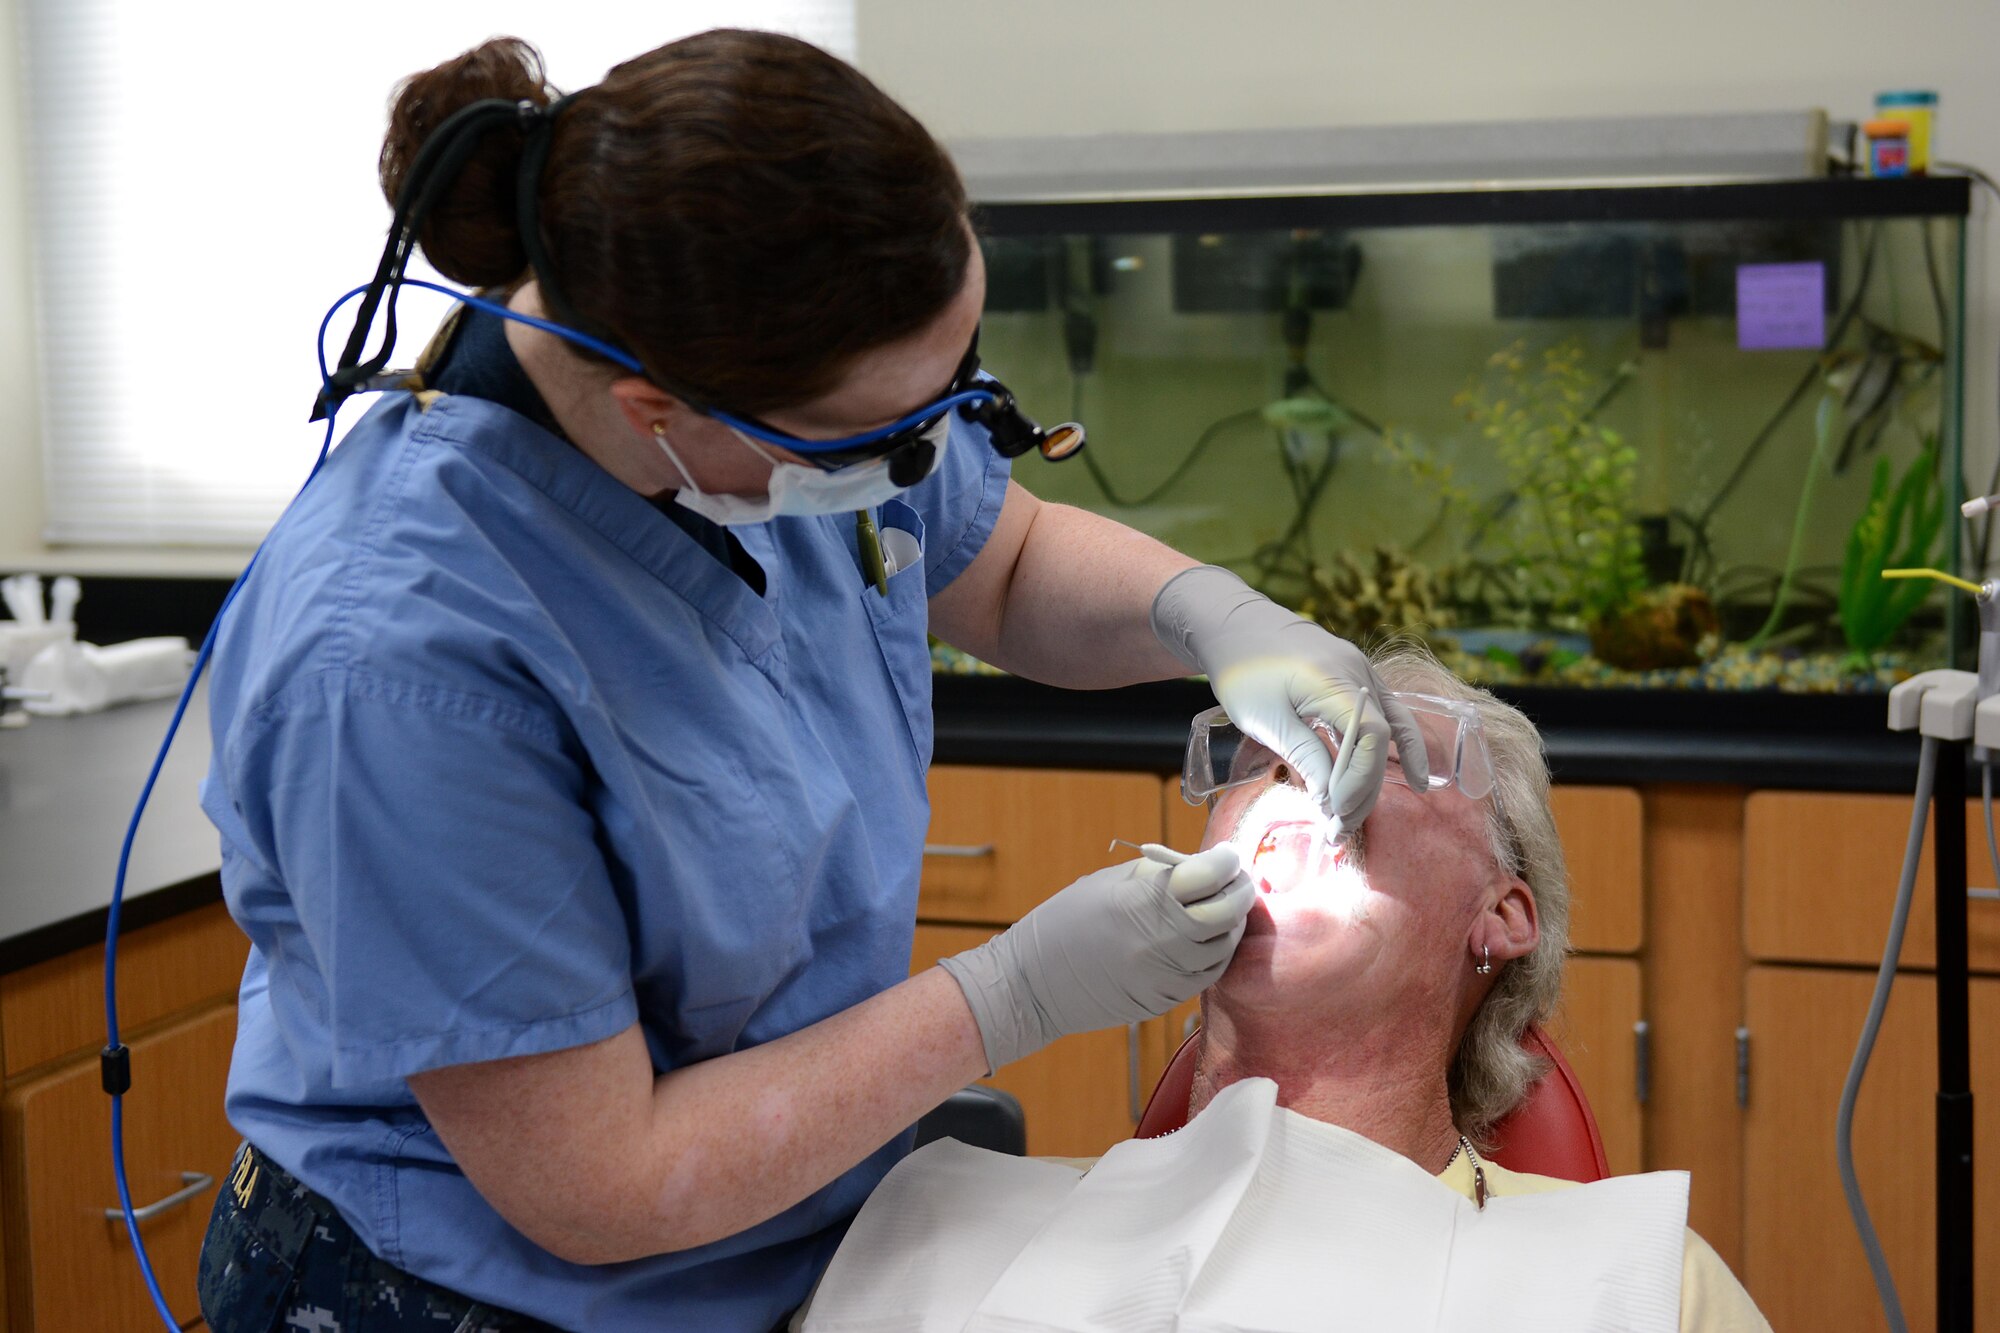 Navy Lt. Juliana Fila, a dentist from Naval Hospital Bremerton, Wash., cleans a patient’s teeth during Innovative Readiness Training at Mountain Home, Ark., June 12, 2017. The IRT program allows active-duty, guard and reserve members to volunteer for real-world training opportunities through engineering, veterinarian, medical, and construction projects that benefit the sometimes-forgotten citizens of American communities in need. (U.S. Air National Guard photo by Staff Sgt. Carlynne DeVine)